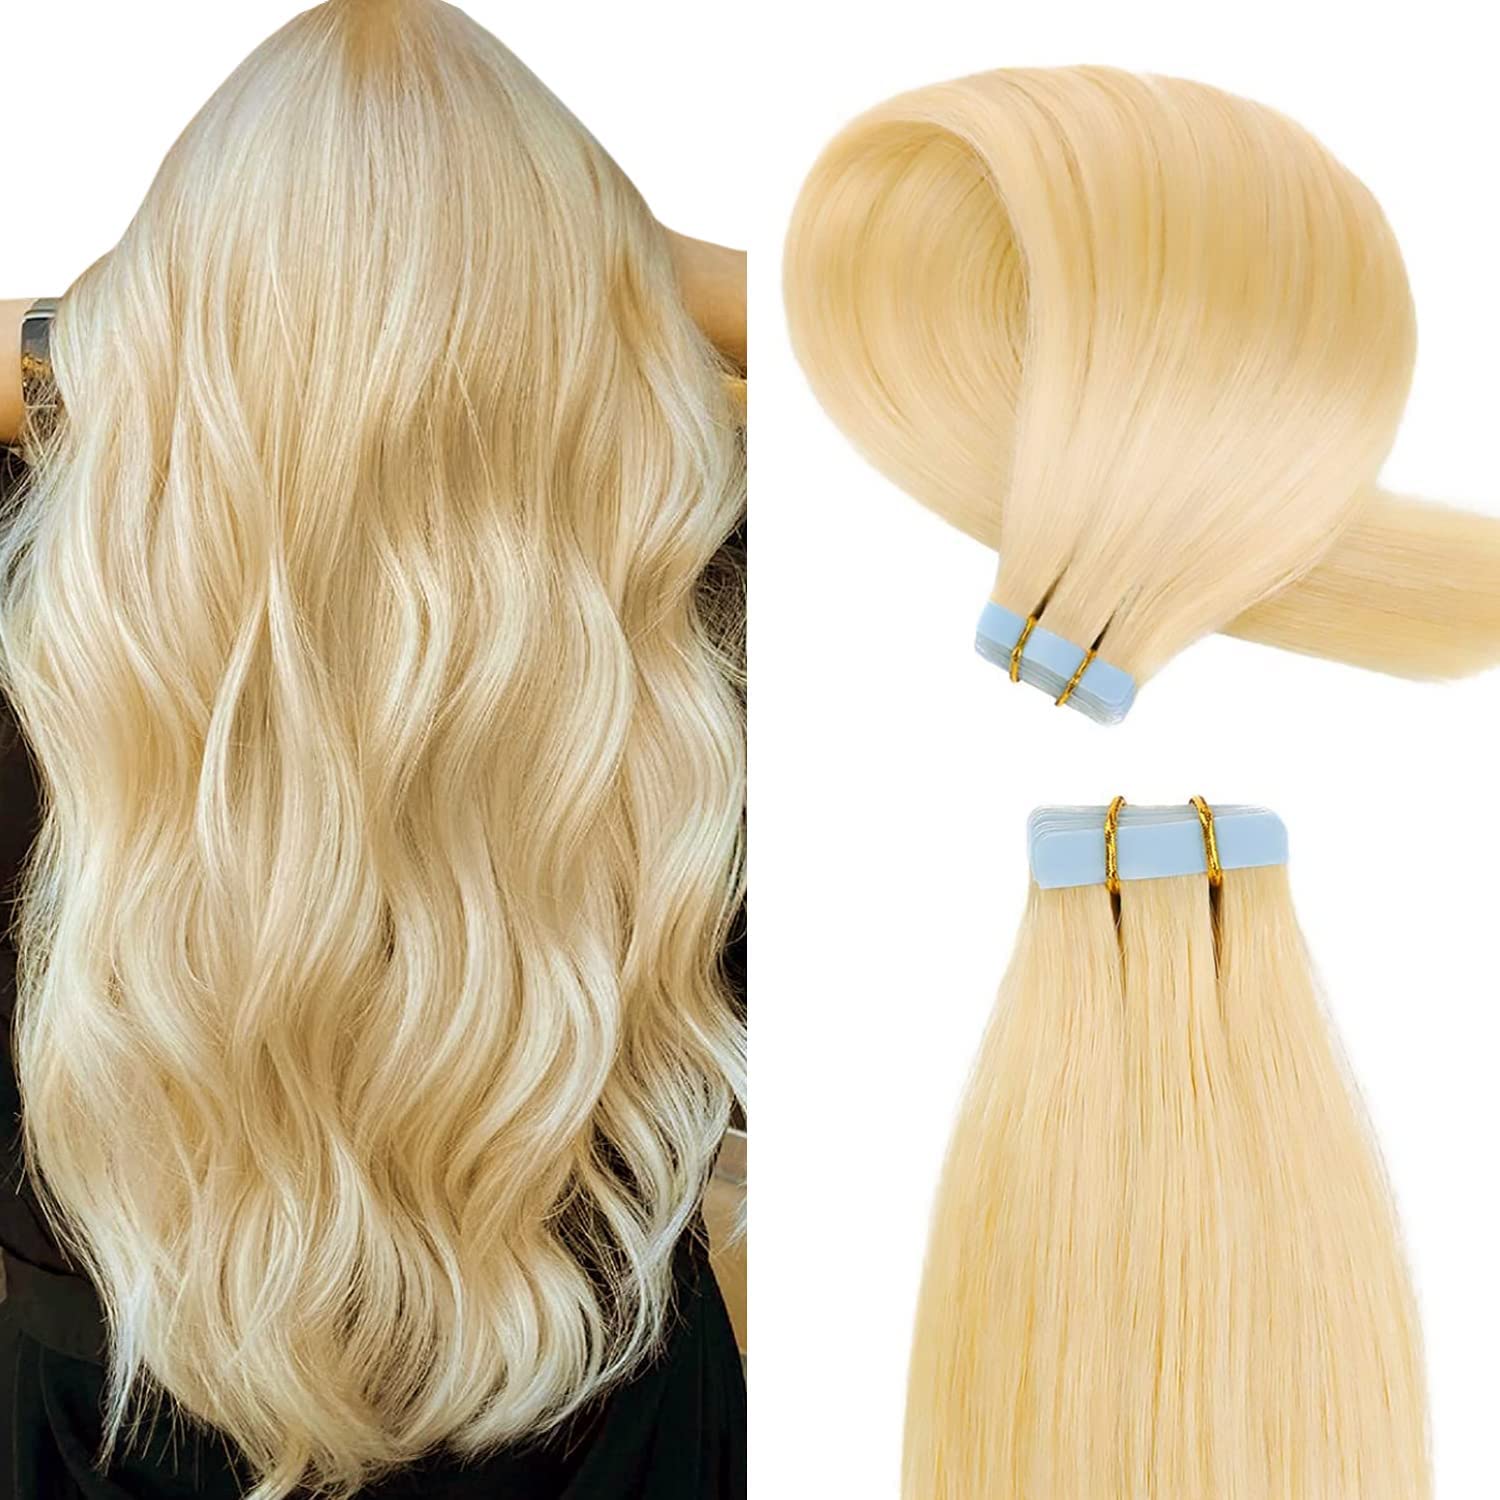 Certified Tape Hair Extensions Online Course - Expert Instruction at Che Academy